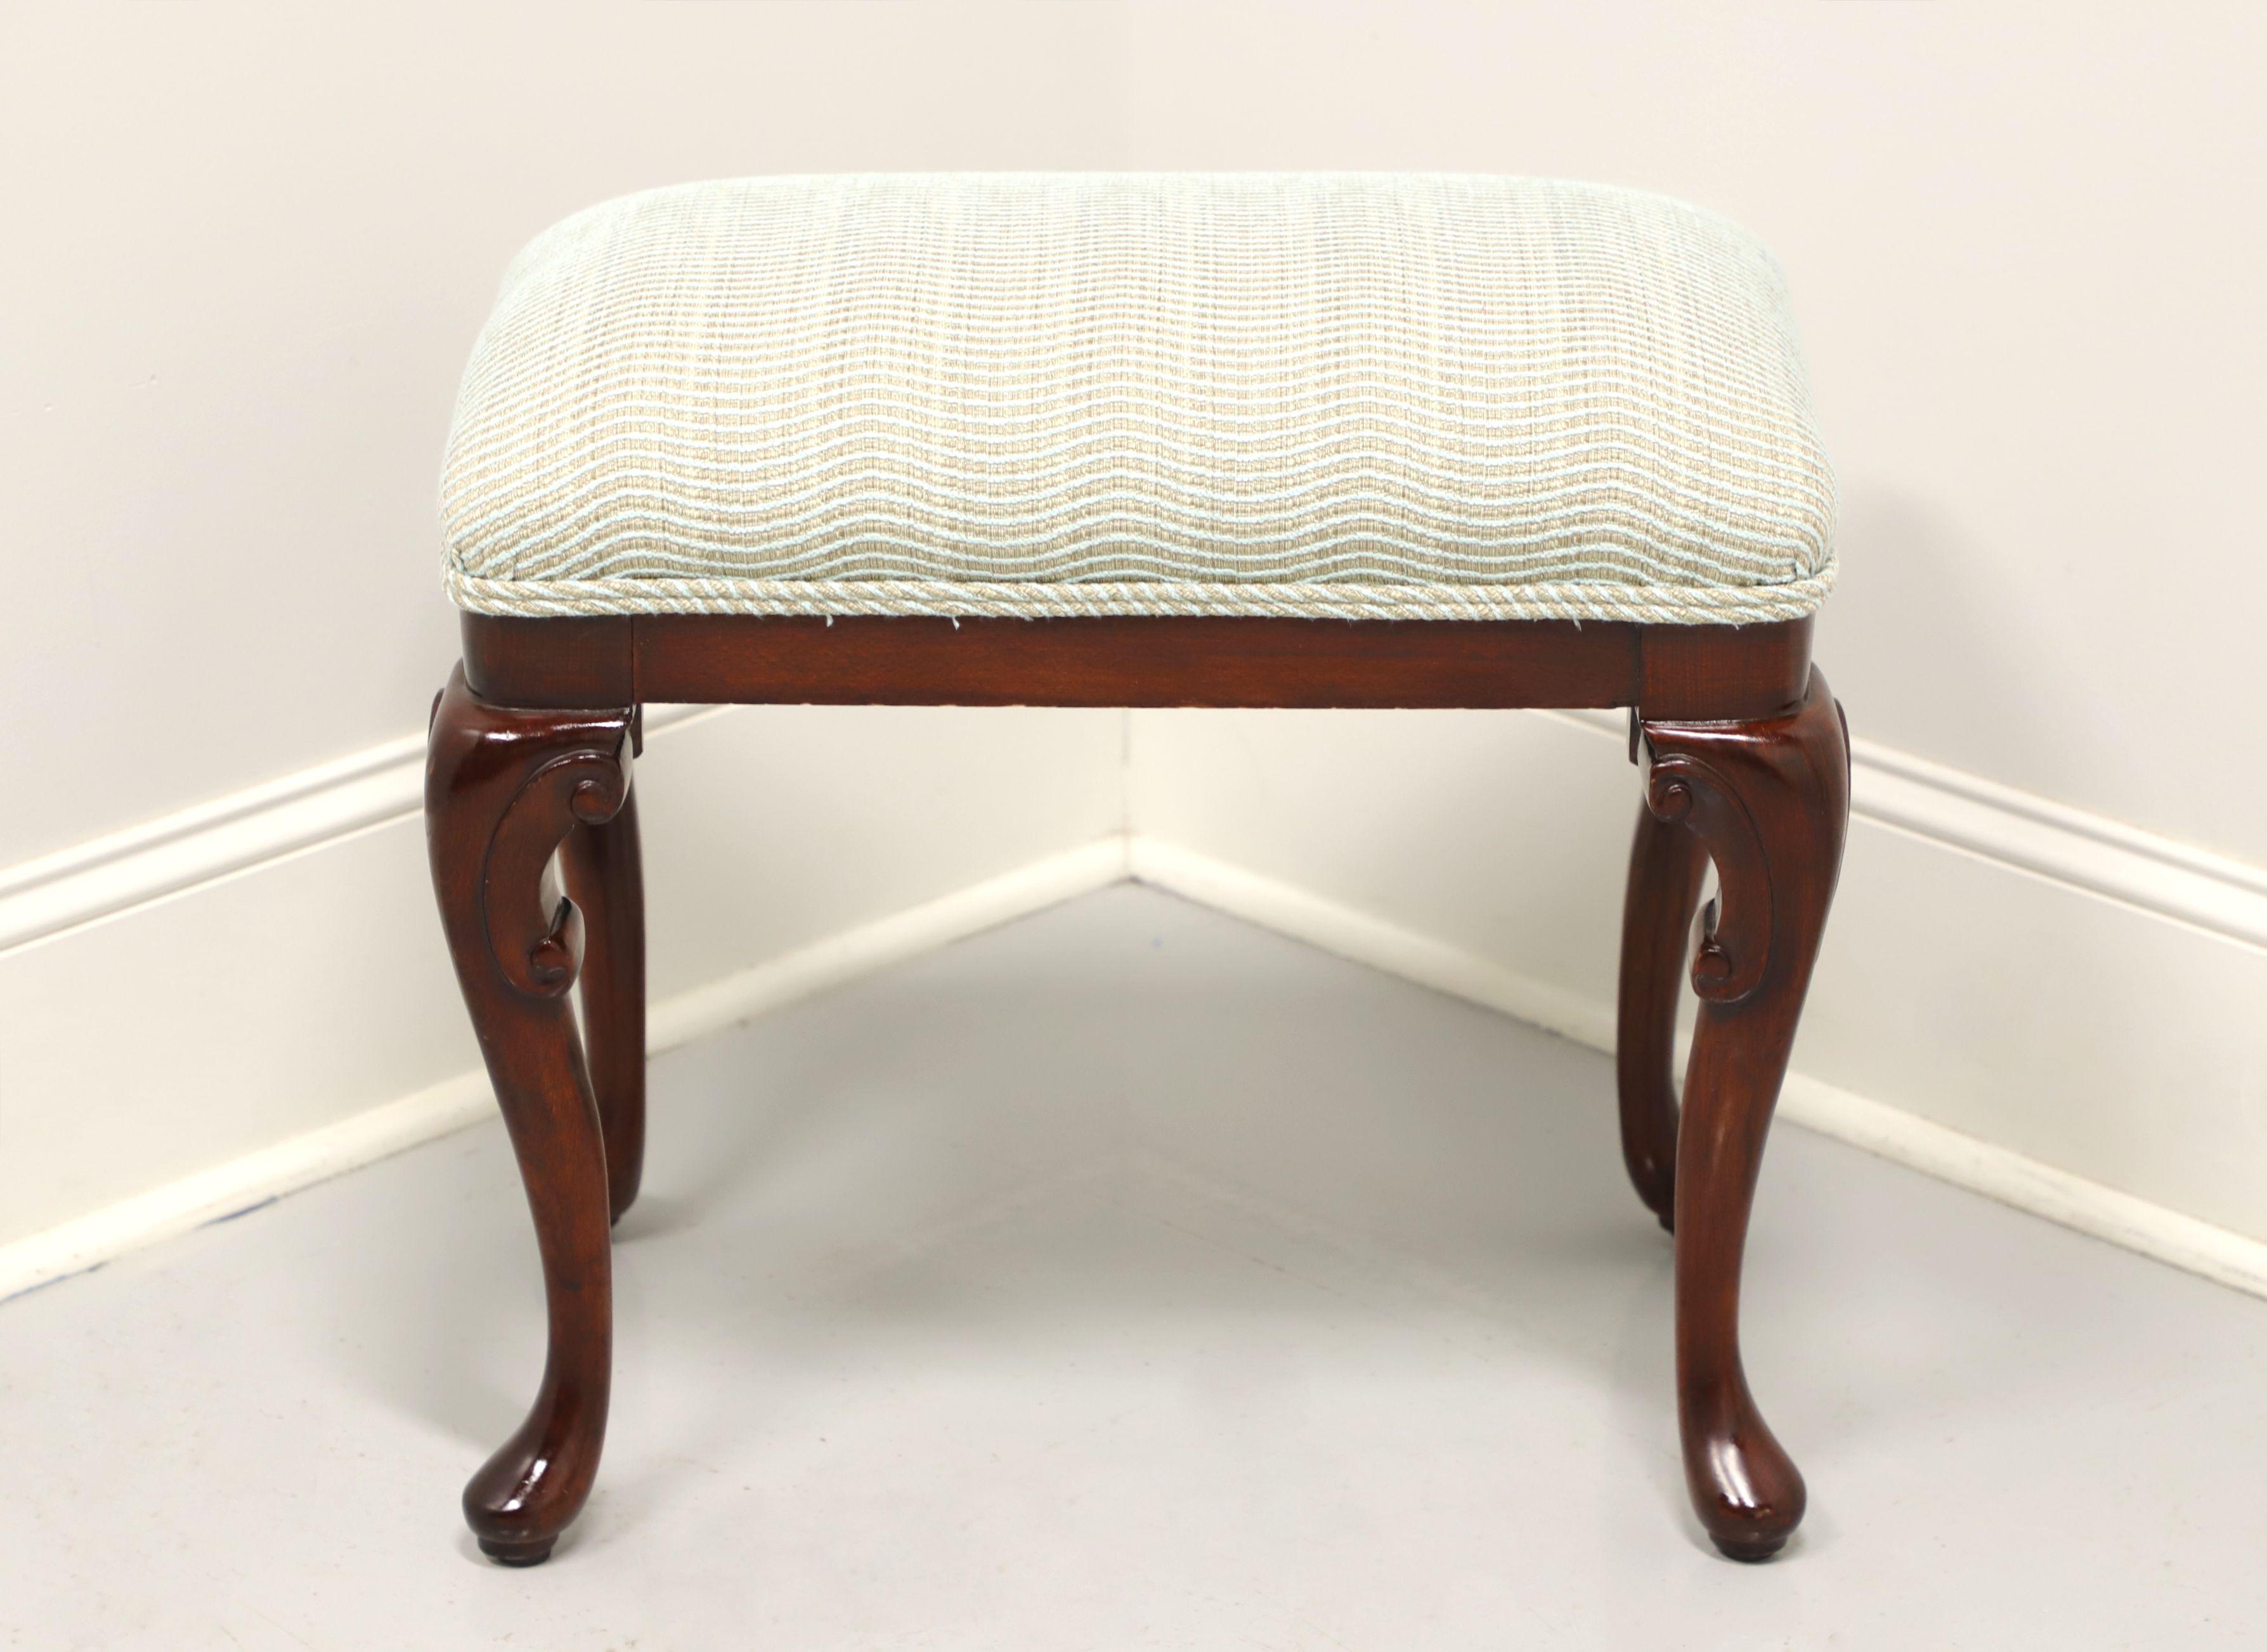 A Queen Anne style bench / footstool, unbranded, similar in quality to Ethan Allen. Solid mahogany with carved knees, cabriole legs and pad feet. Features a light blue tweed like fabric upholstered seat. Made in the USA, in the late 20th